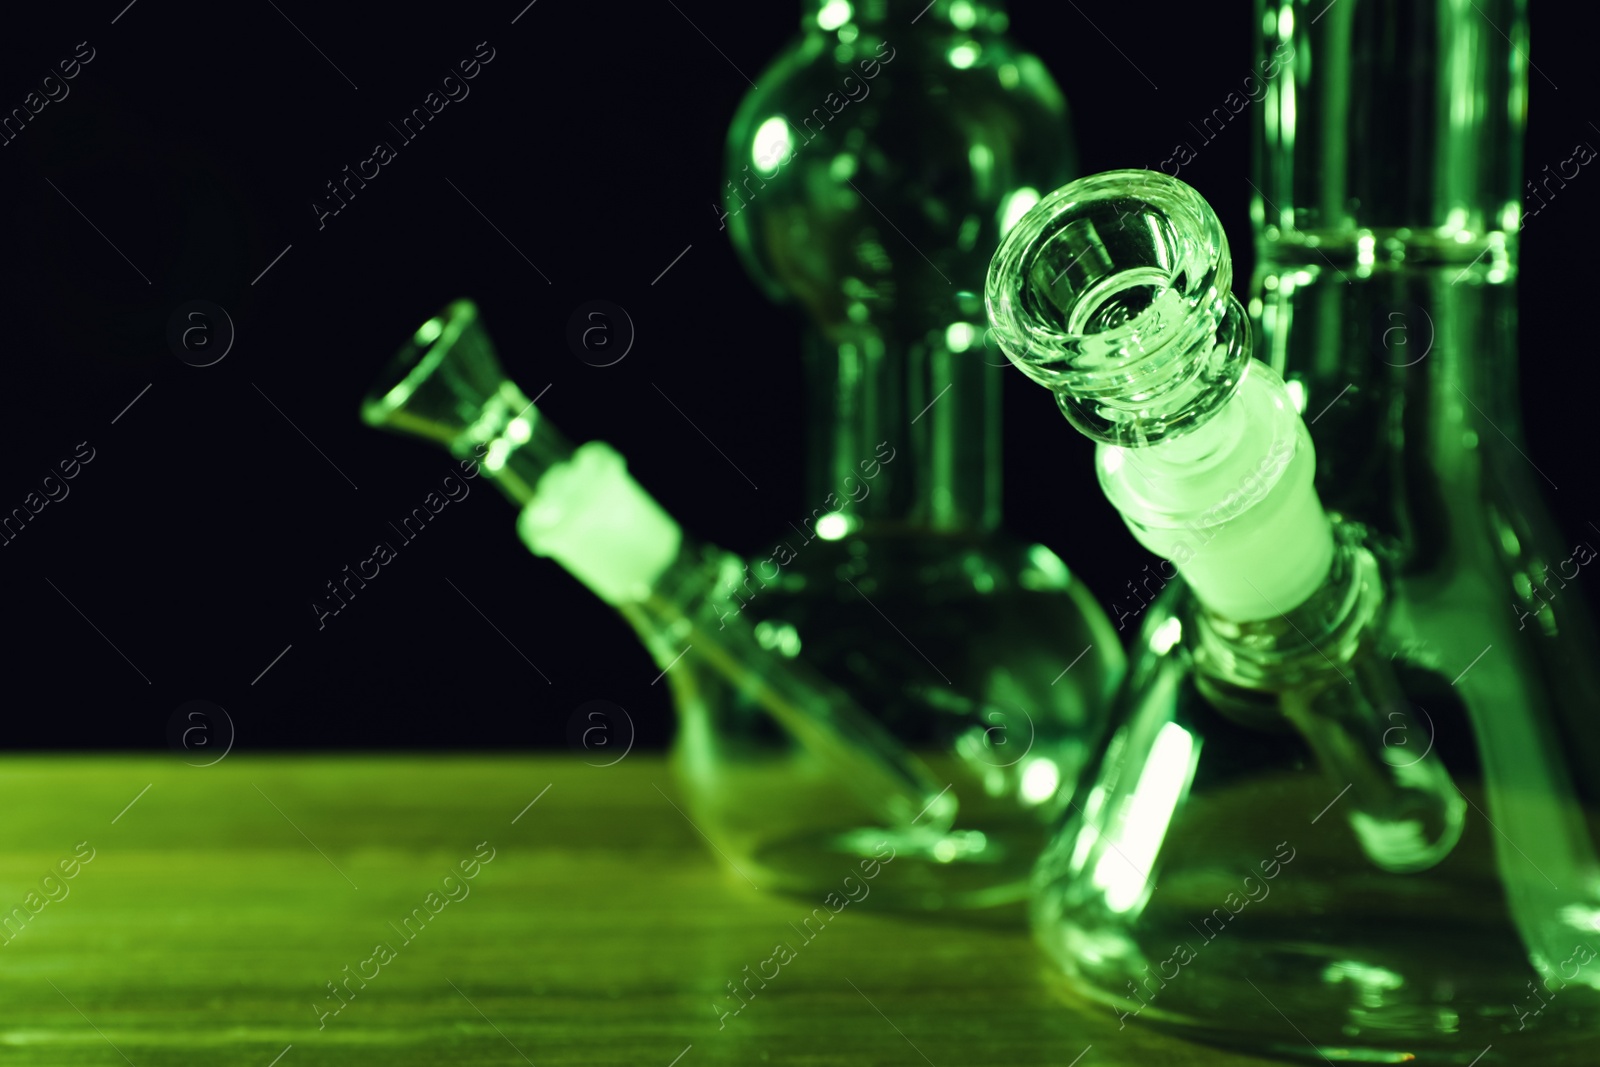 Photo of Glass bongs on wooden table against black background, toned in green. Smoking device